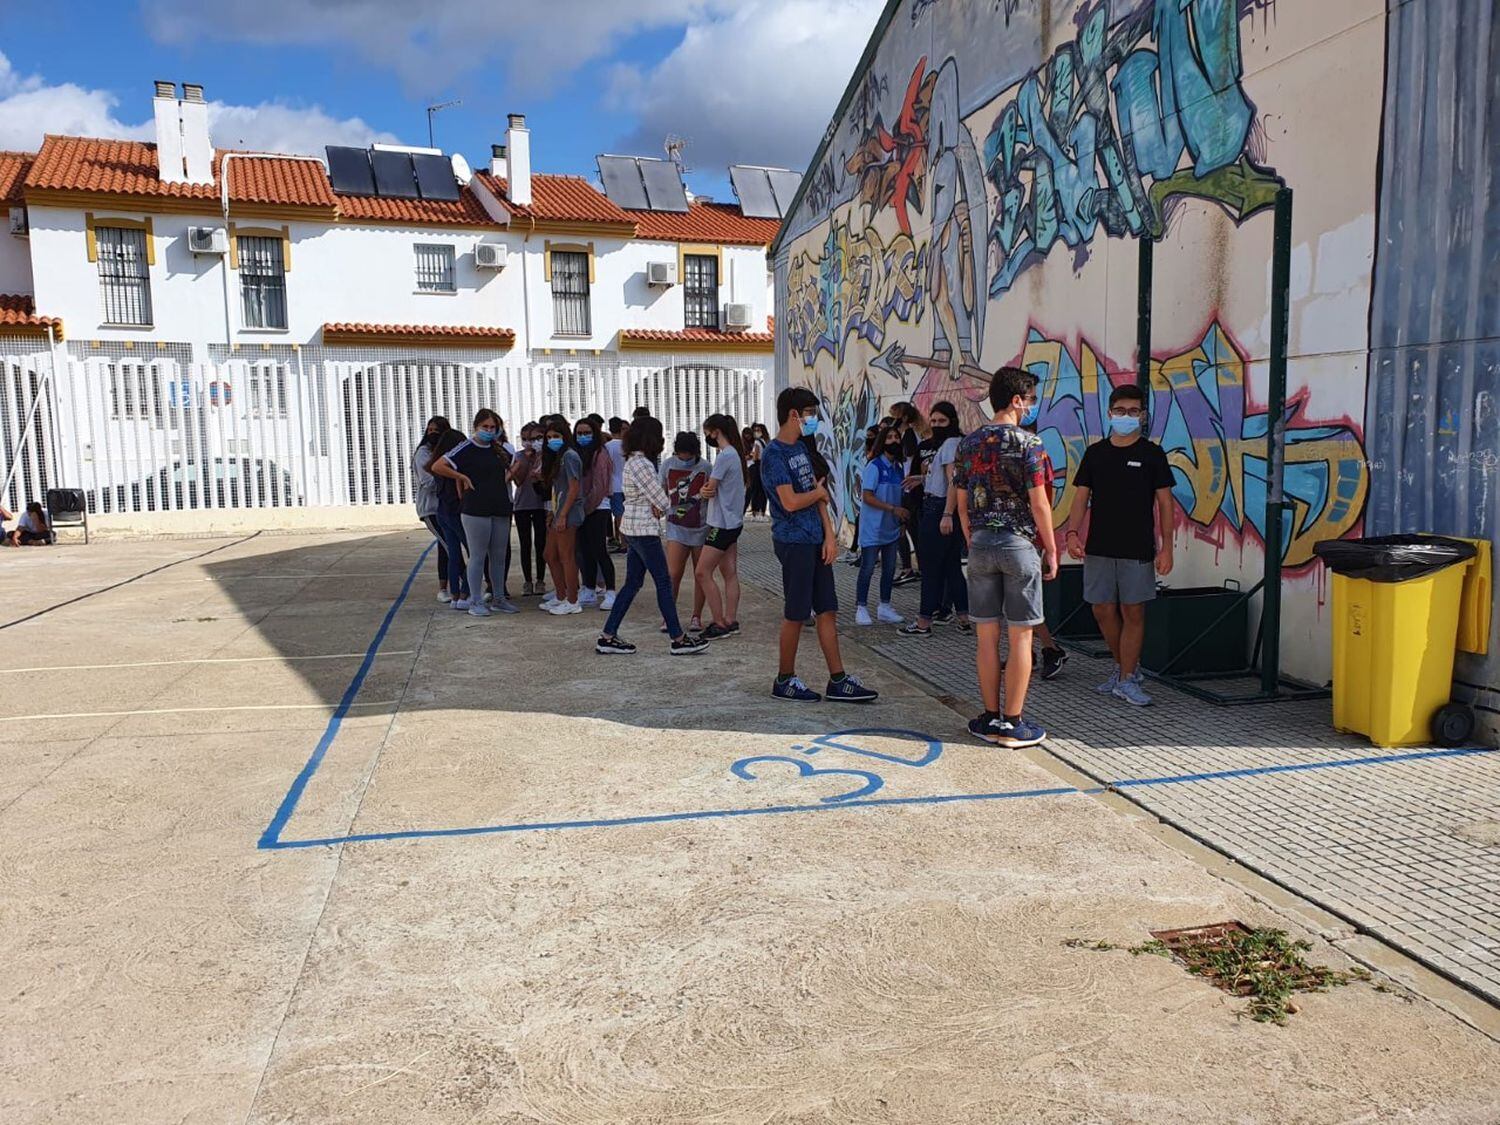 Secondary school students standing within their designated area in Aljaraque, in Huelva province.